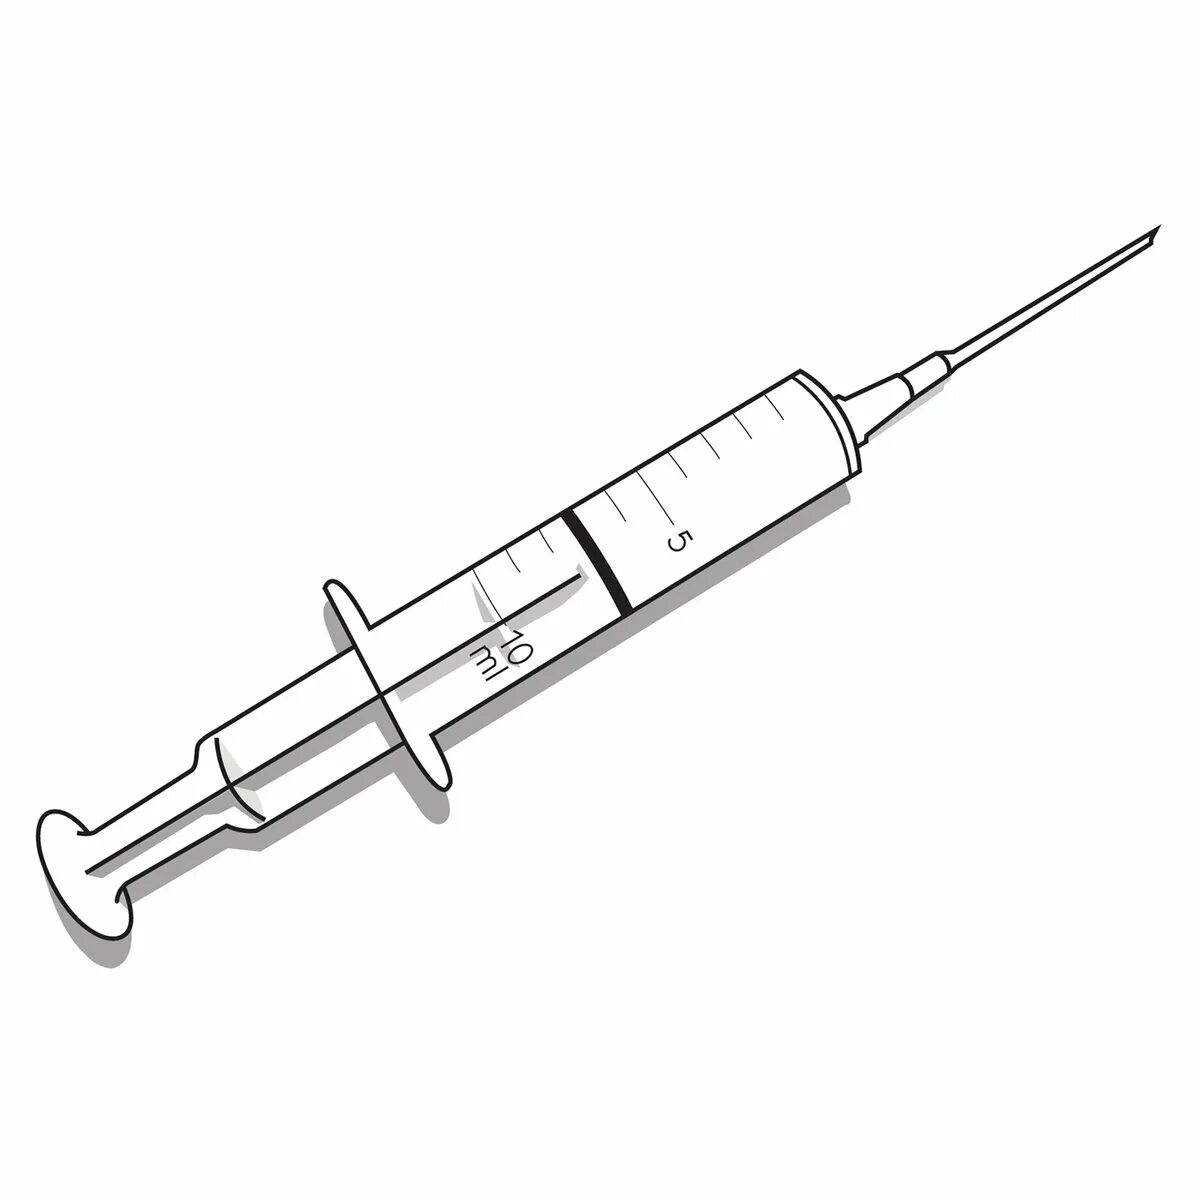 Adorable baby syringe coloring page